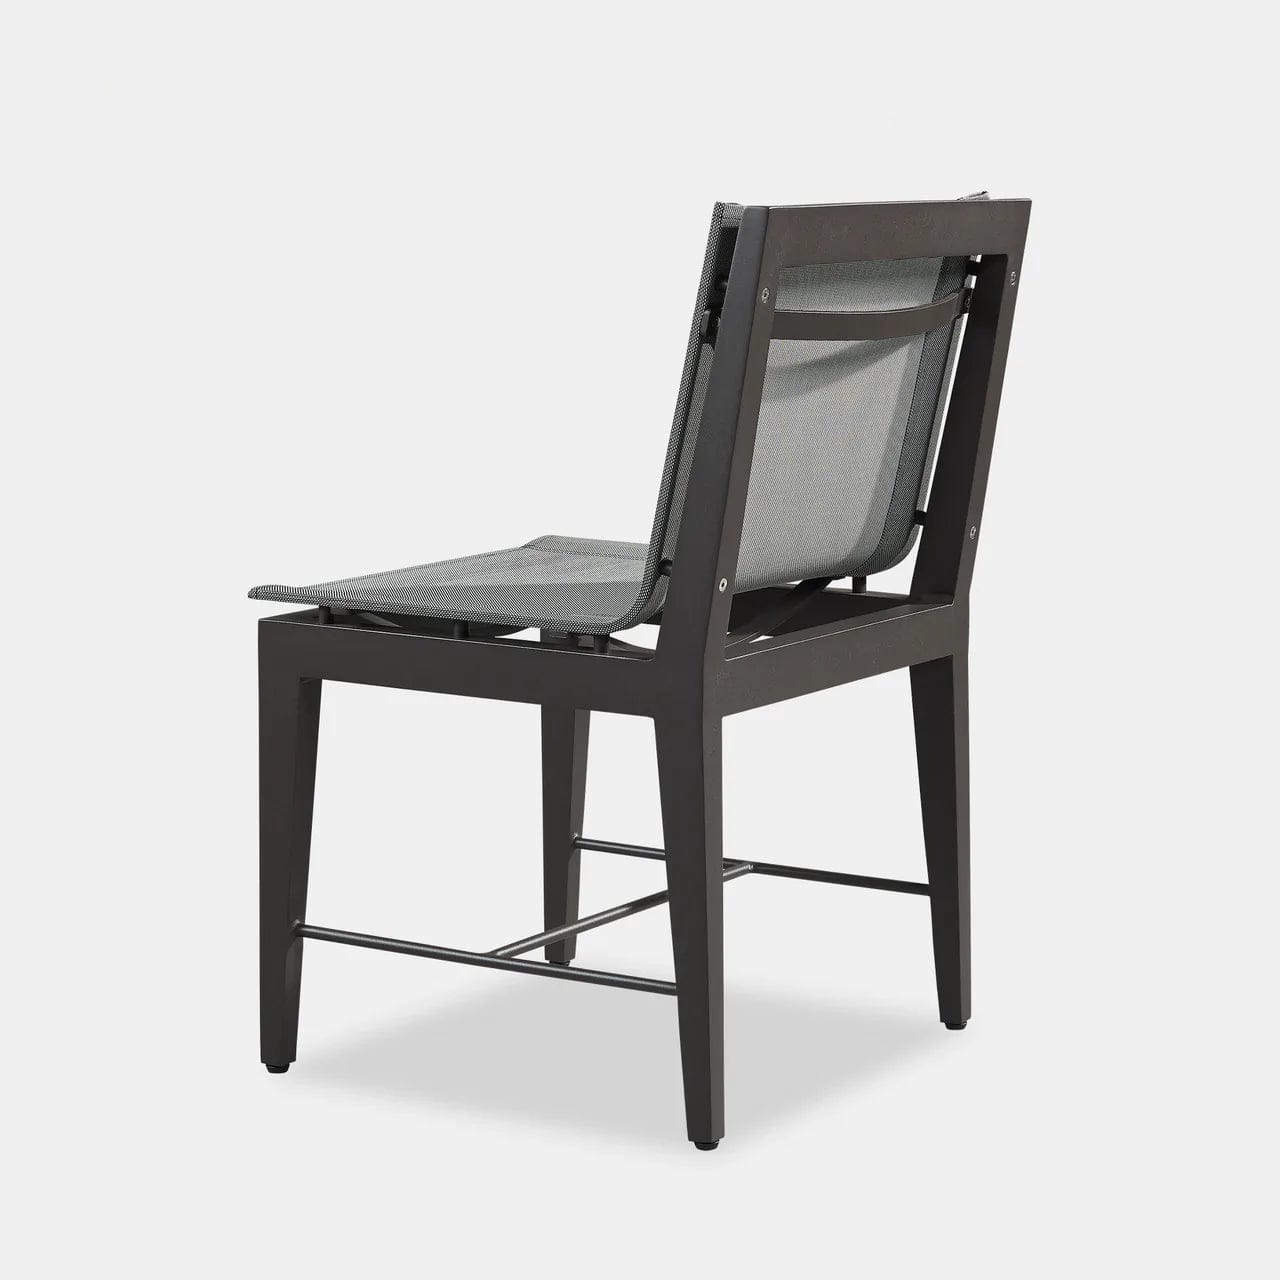 Byron Aluminum Outdoor Dining Chair